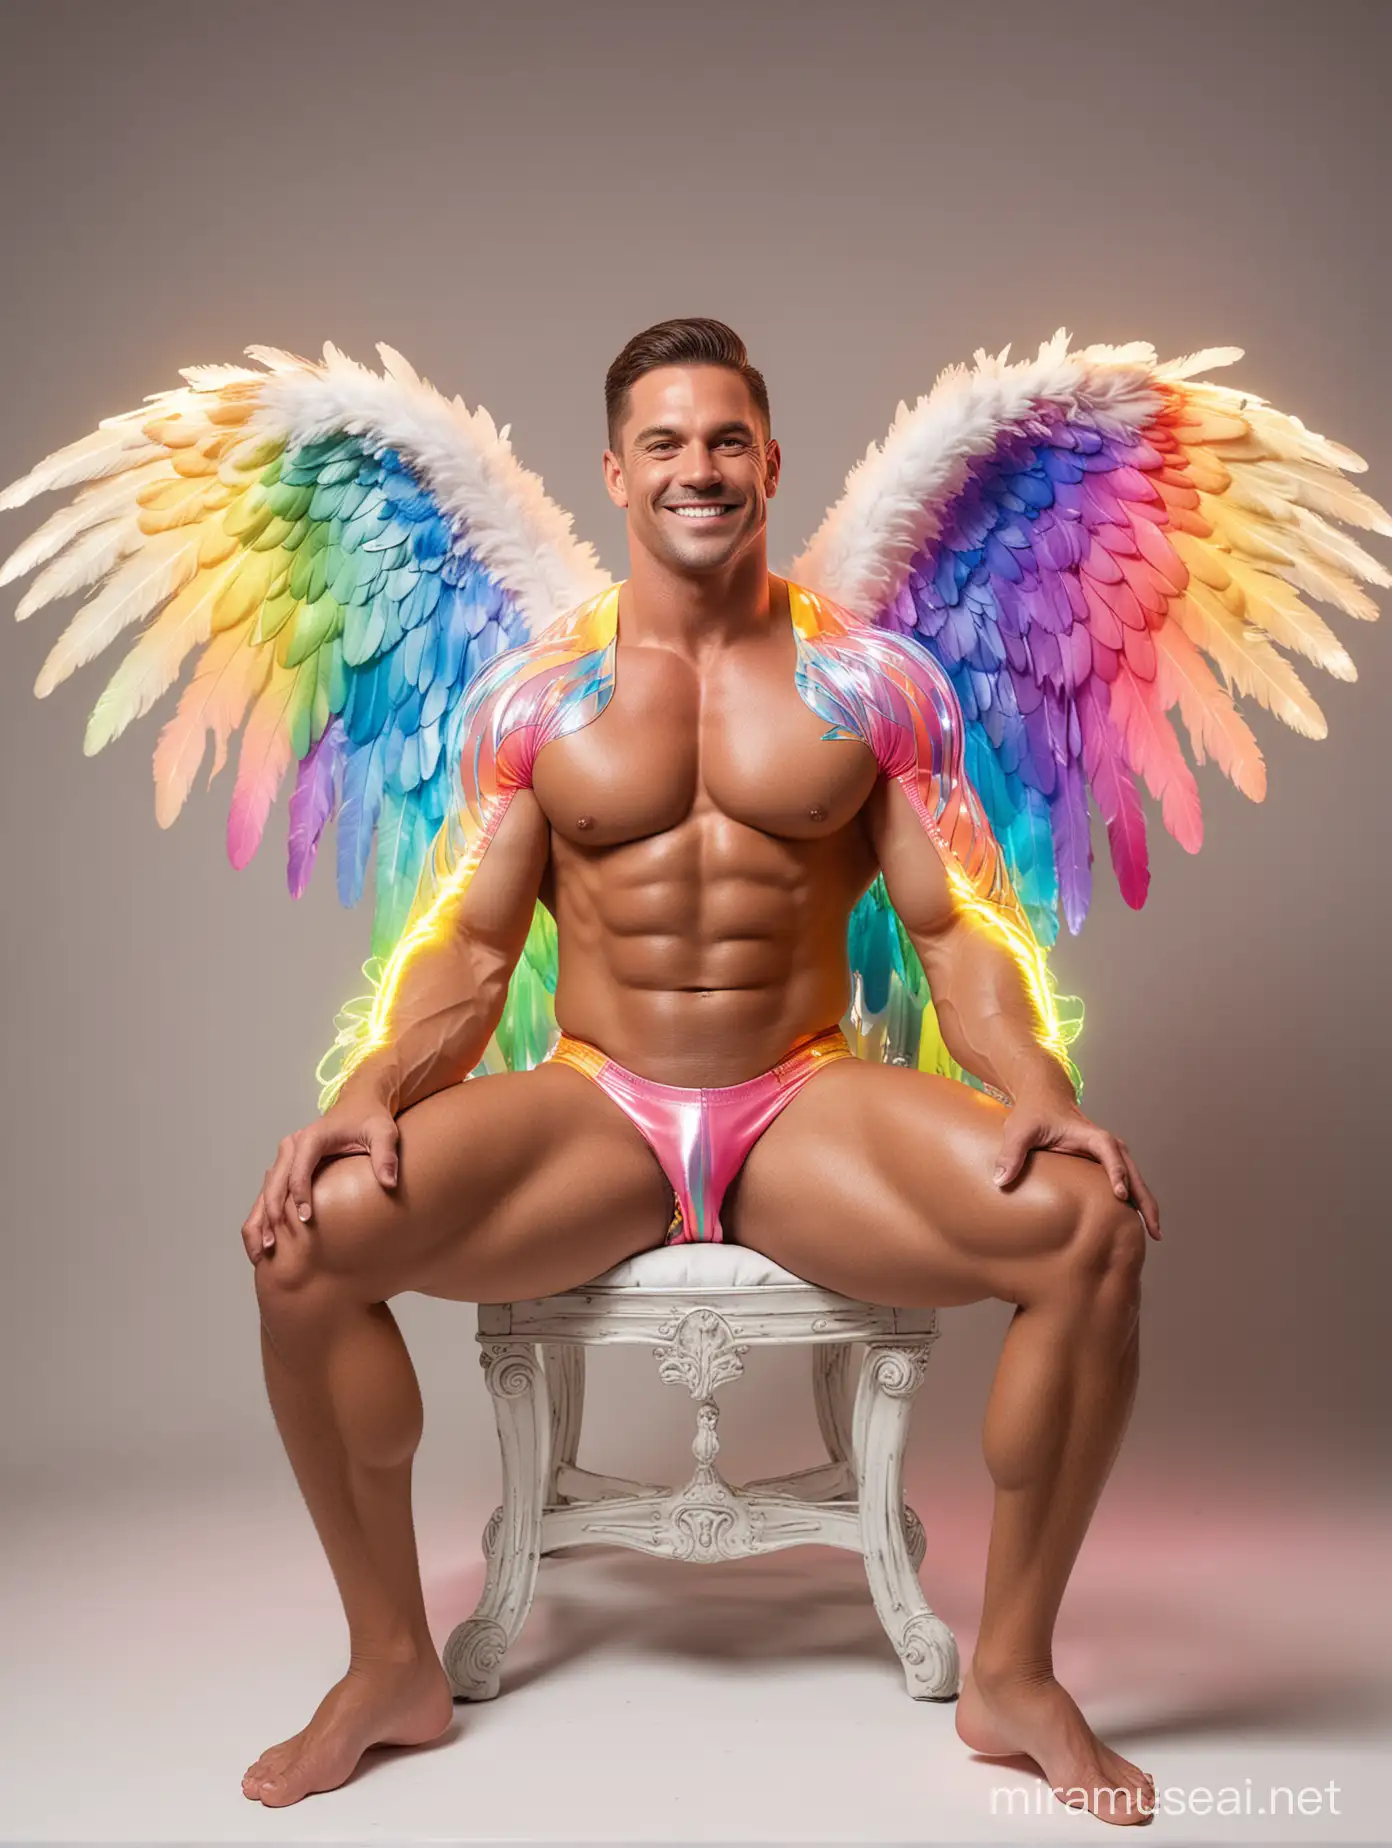 T'Gall Studio Light Full Body to feet Topless 30s Ultra Chunky IFBB Bodybuilder Daddy with Great Smile wearing Multi-Highlighter Bright Rainbow with white Coloured See Through Eagle Wings Shoulder LED Jacket Short shorts left arm up Flexing seating on a Golden Angel Chair